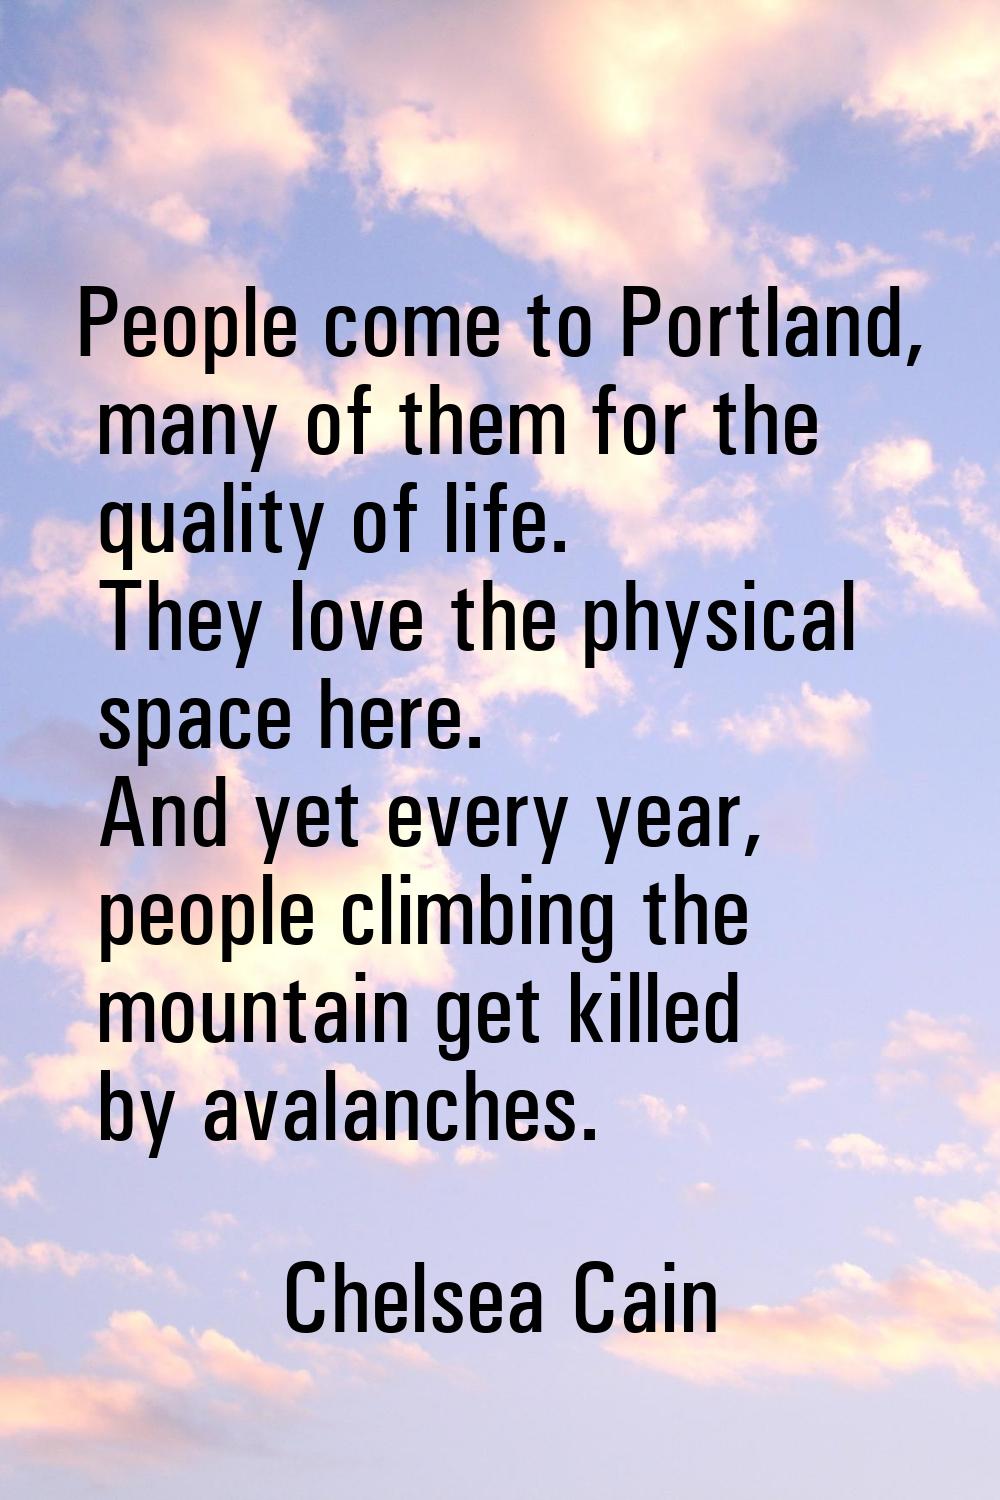 People come to Portland, many of them for the quality of life. They love the physical space here. A